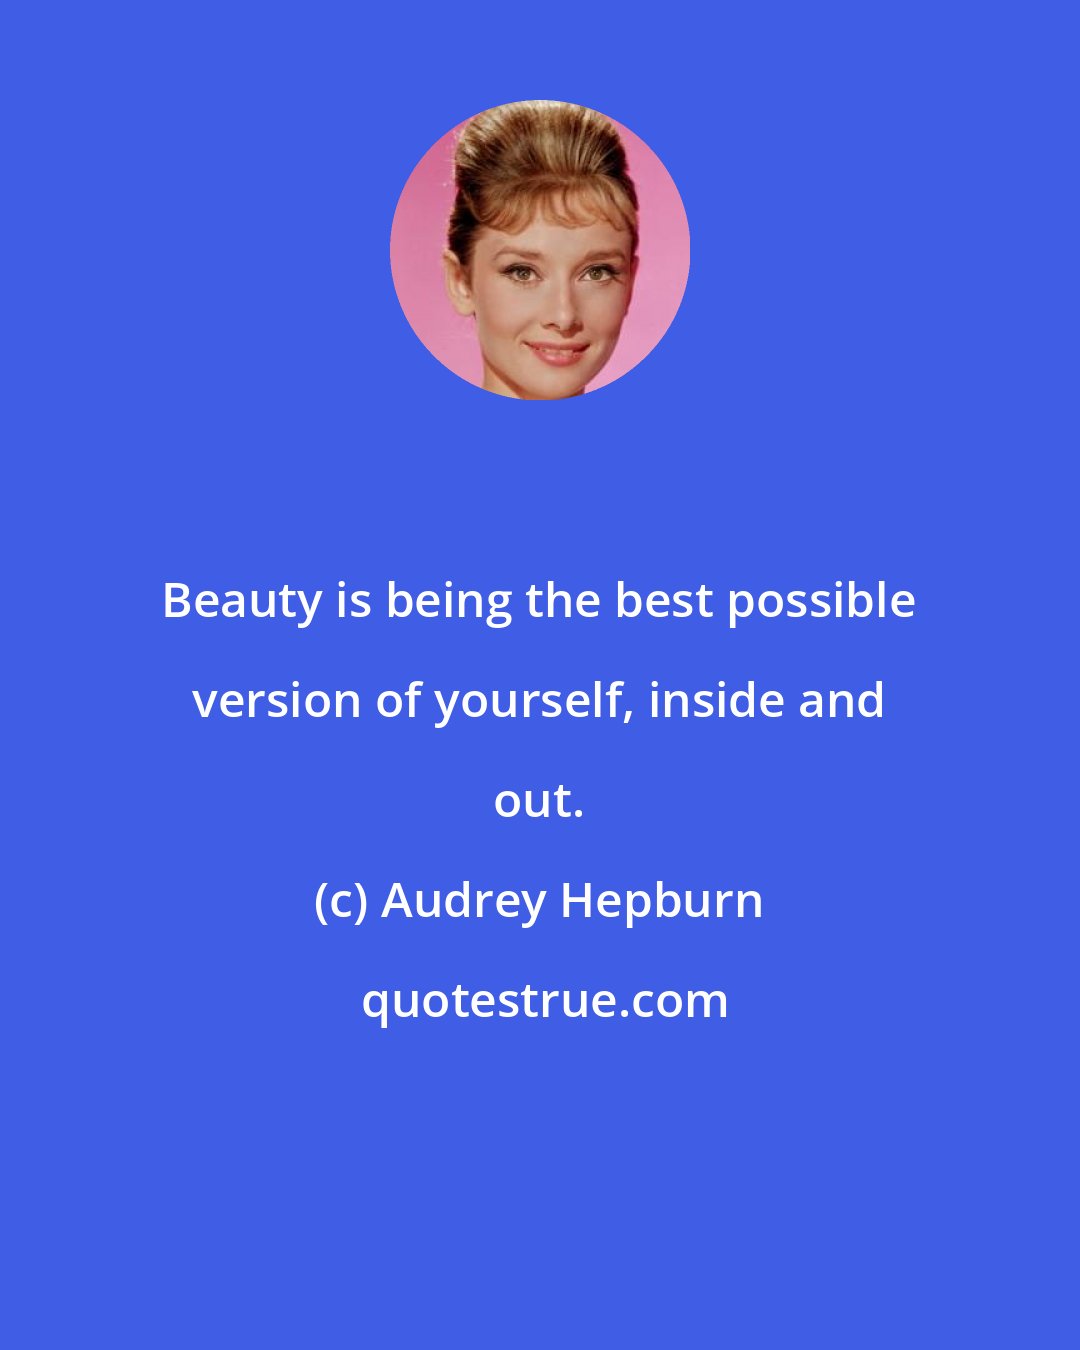 Audrey Hepburn: Beauty is being the best possible version of yourself, inside and out.